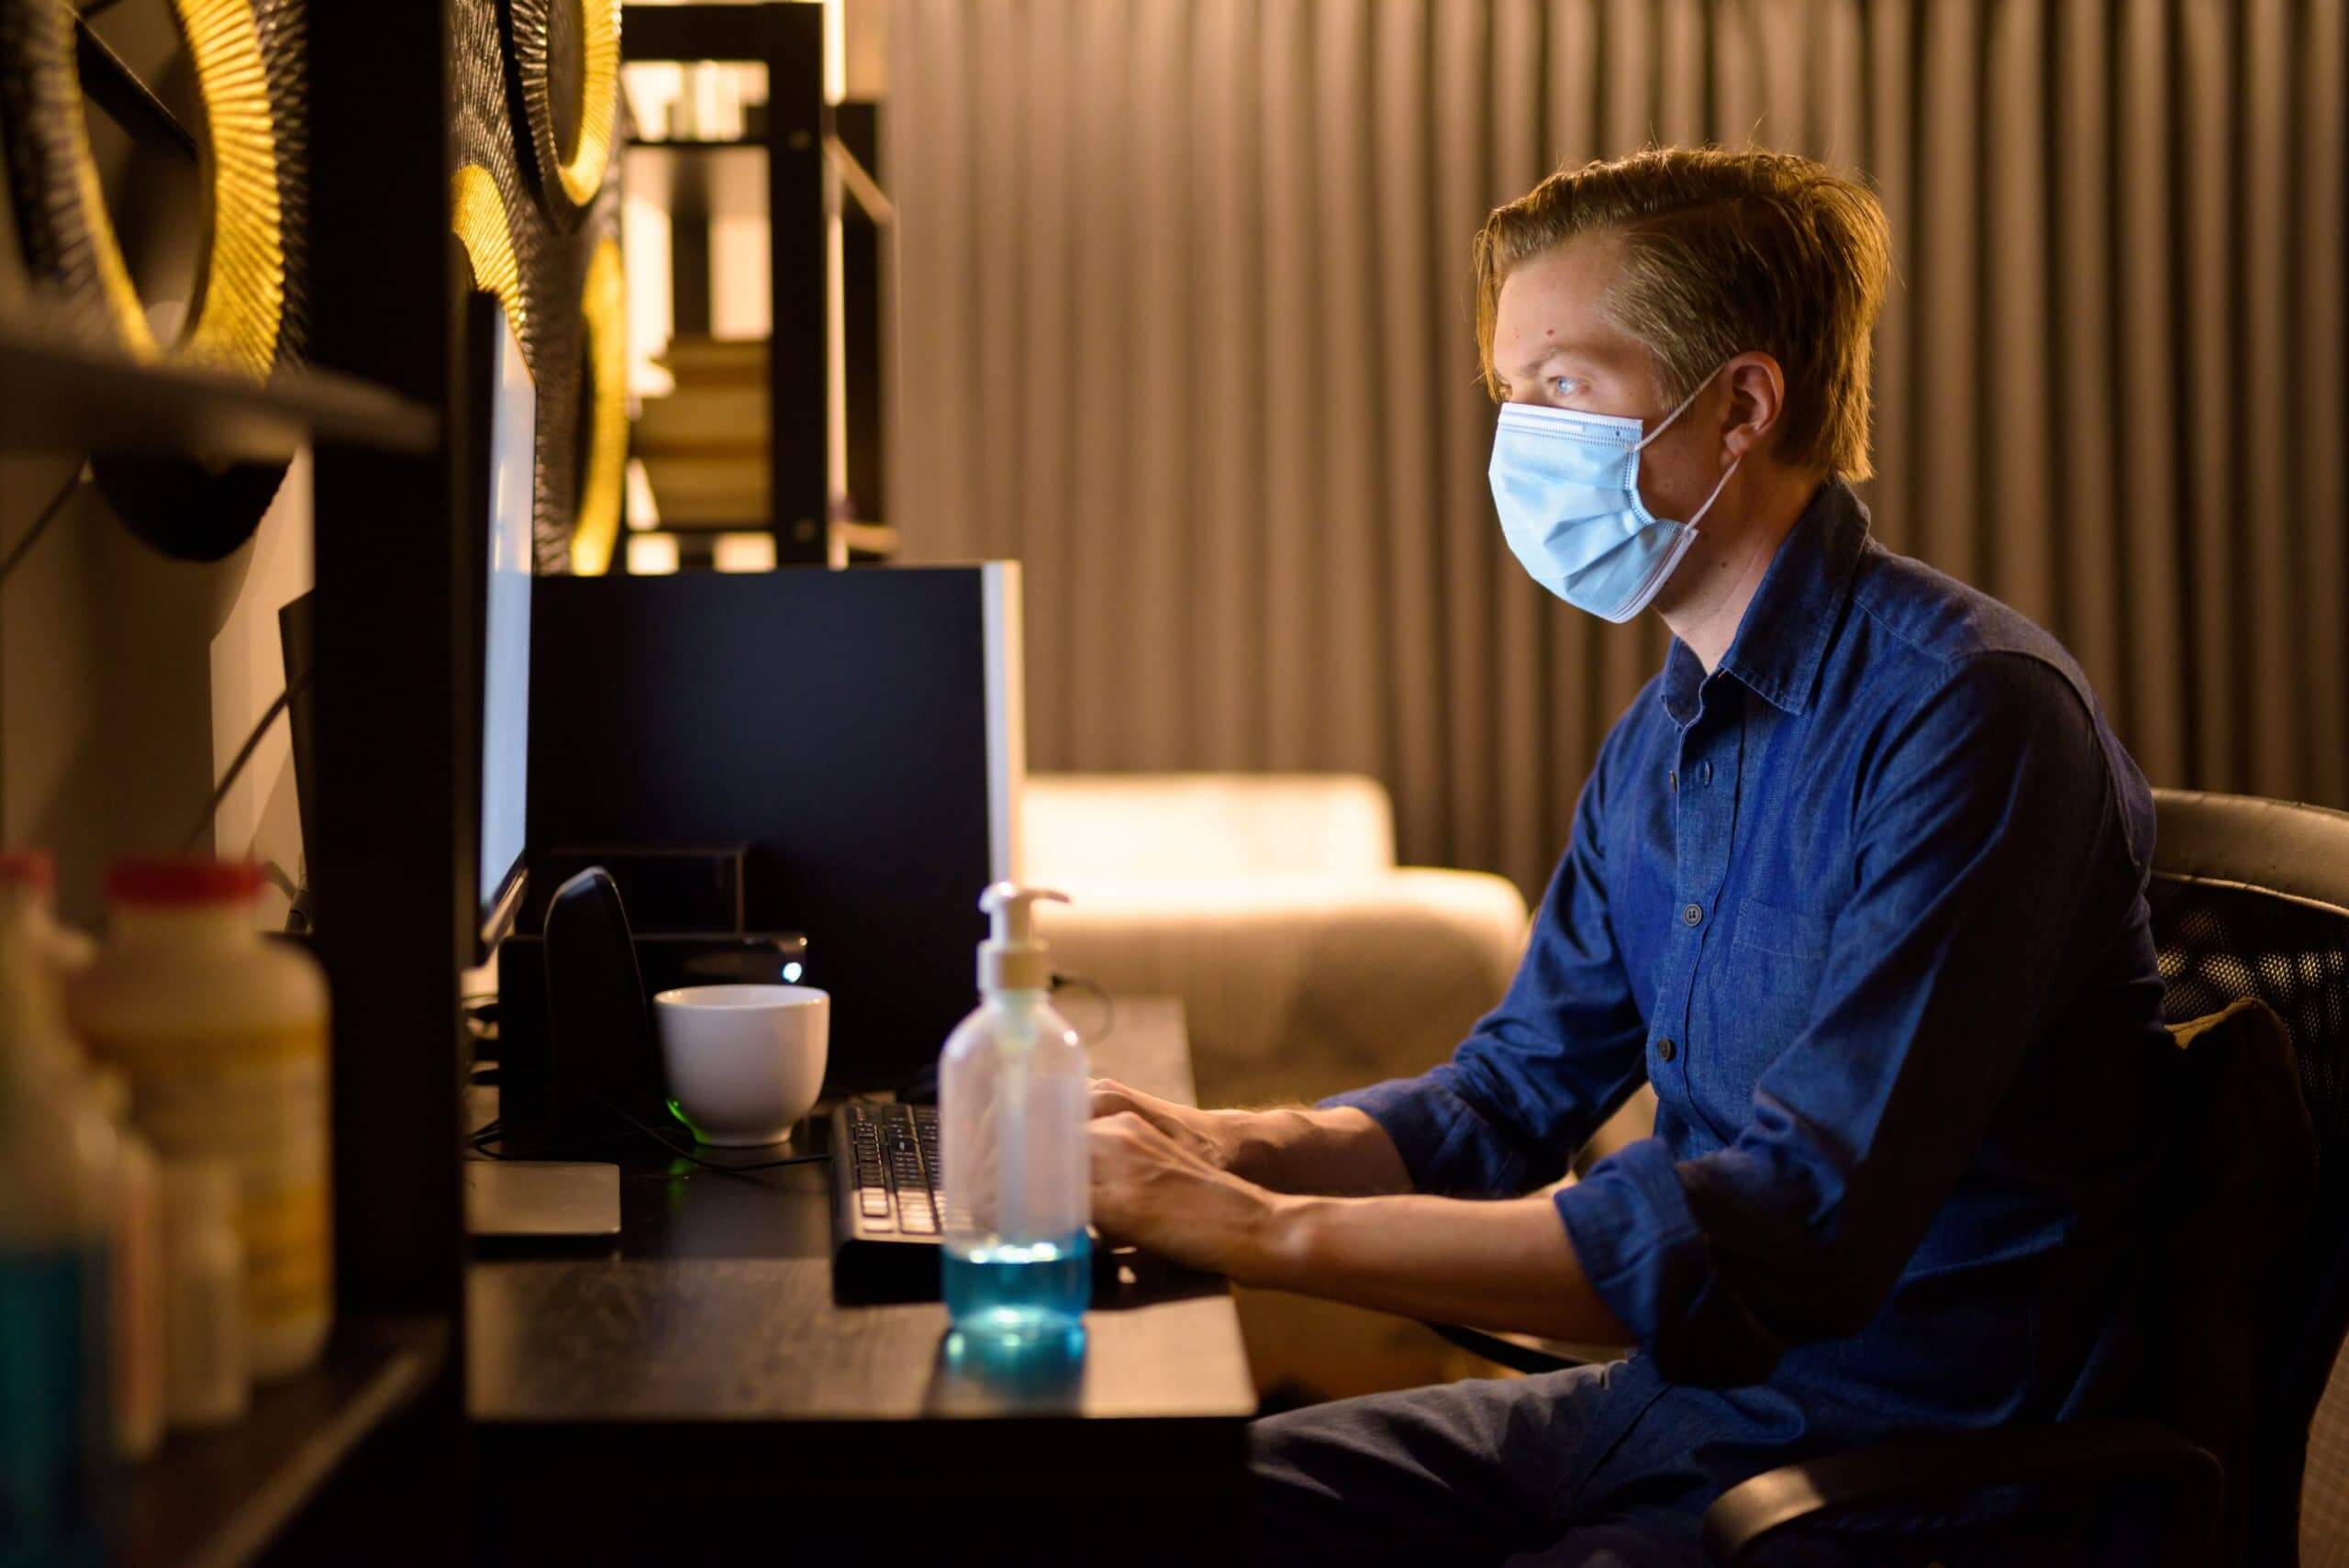 Young businessman with mask for protection from corona virus outbreak working from home during quarantine